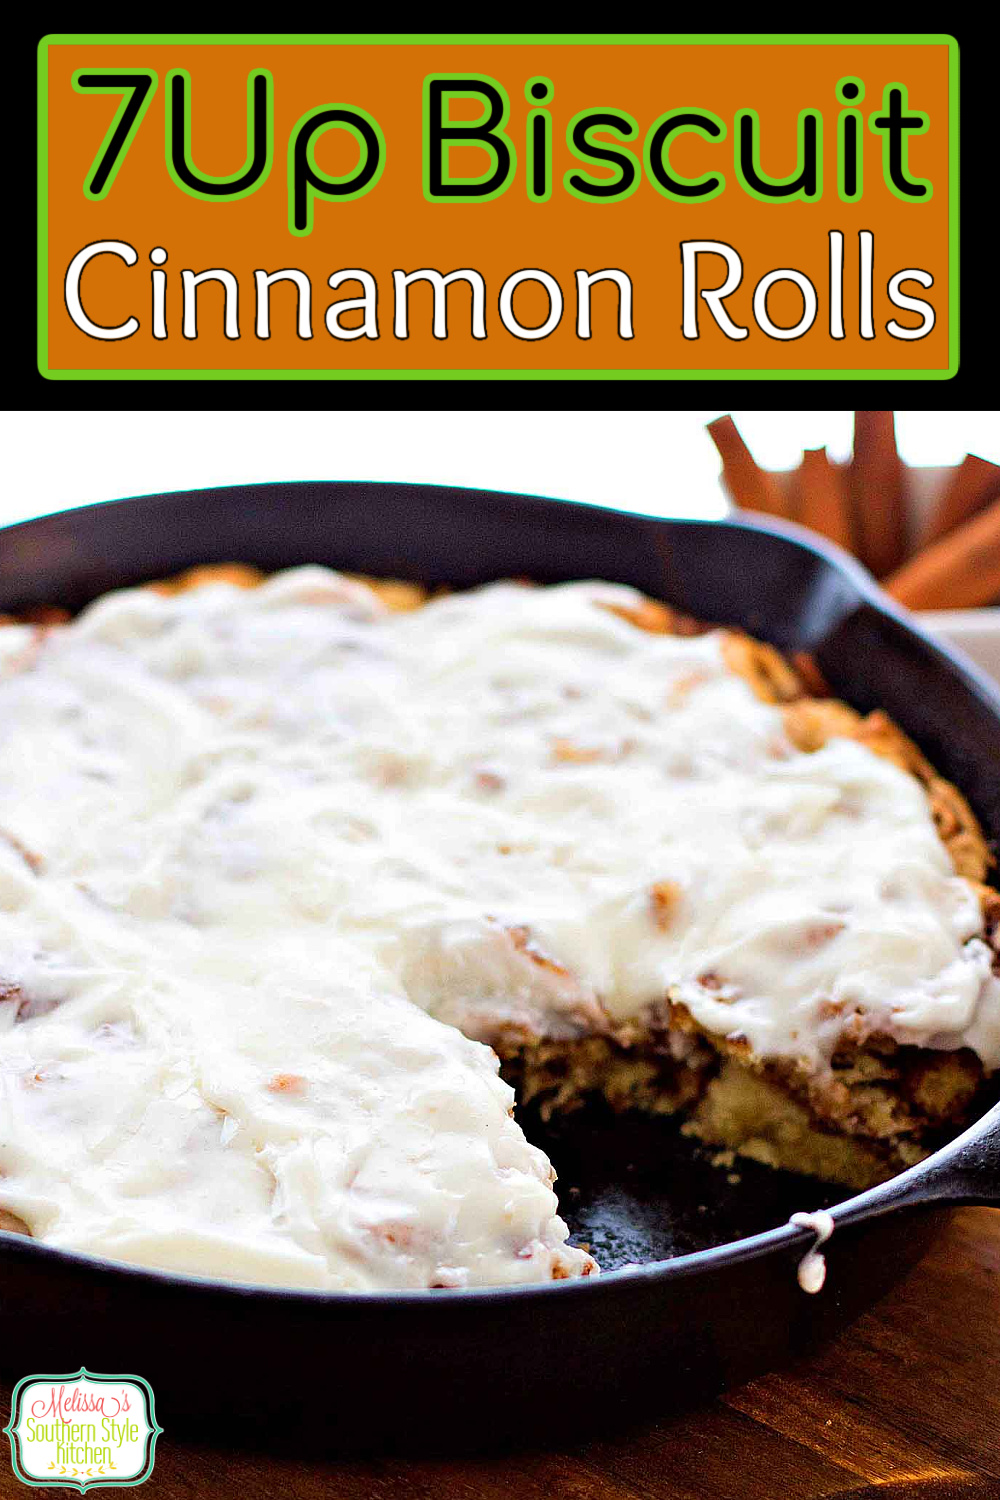 No one will ever guess the secret ingredient in these light and fluffy biscuit cinnamon rolls #cinnamonrolls #7UP #biscuits #brunch #breakfastrecipes #southernbiscuits #cinnamonbiscuits #7upcinnamonrolls #holidaybaking #holidaybrunch #southernfood #southernrecipes via @melissasssk